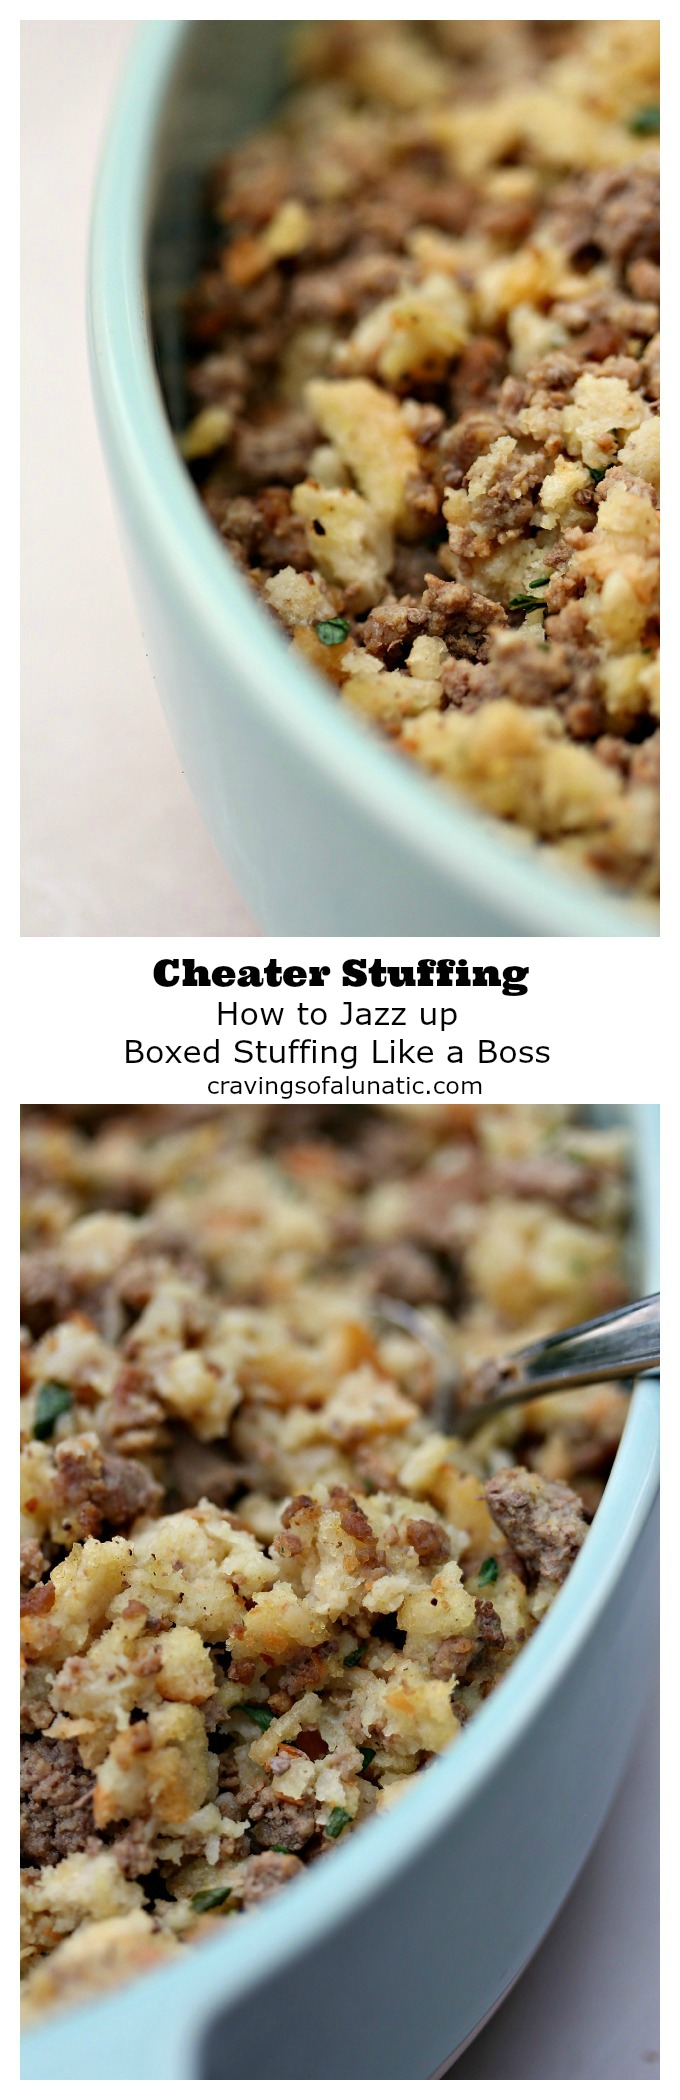 Cheater Stuffing from cravingsofalunatic.com- If you're too busy to make stuffing from scratch this recipe is a great alternative. It's a fabulous recipe for jazzing up boxed stuffing mixes. (@CravingsLunatic) 